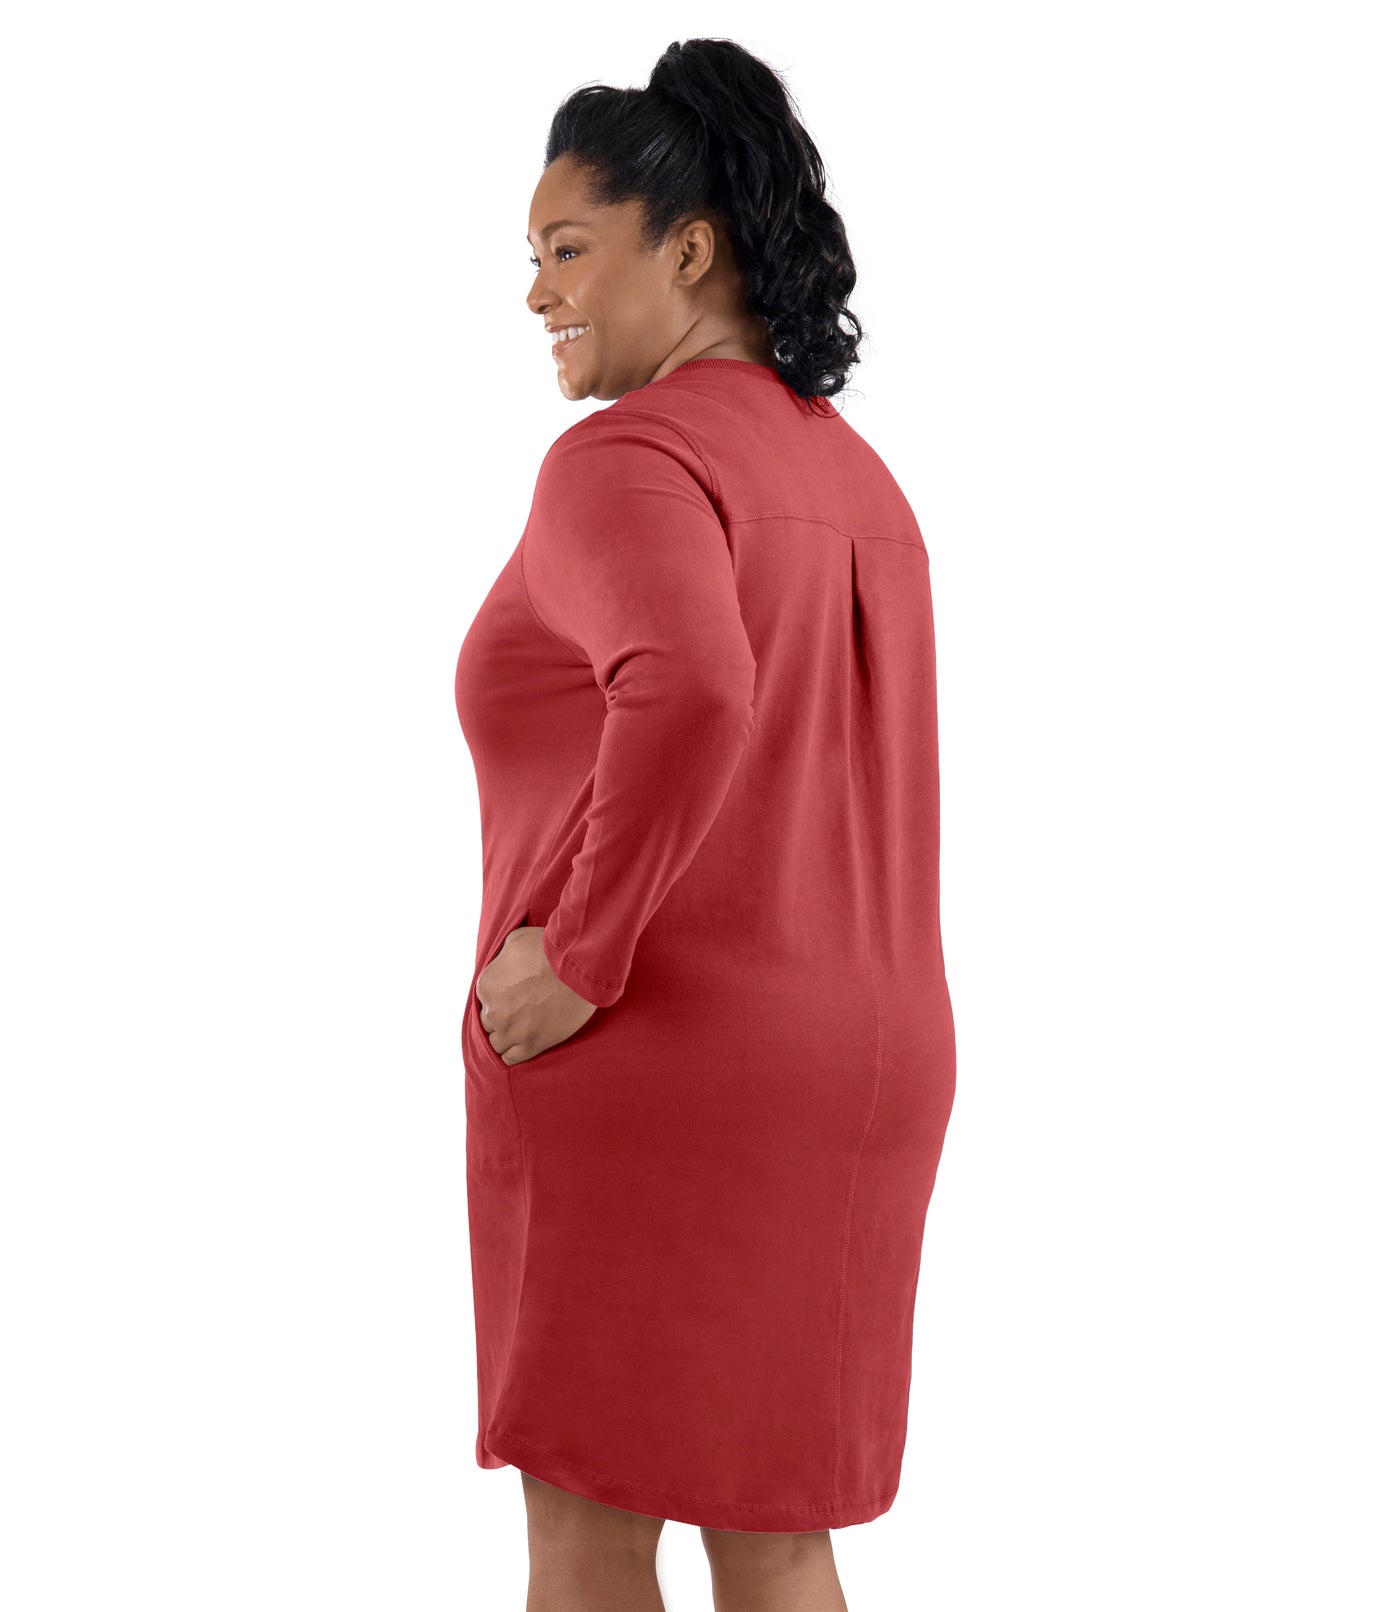 Plus-size model, facing back, left hand in dress pocket. Wearing JunoActive's Legacy Cotton Casual Pocketed Long Sleeve Dress in Sedona Red.